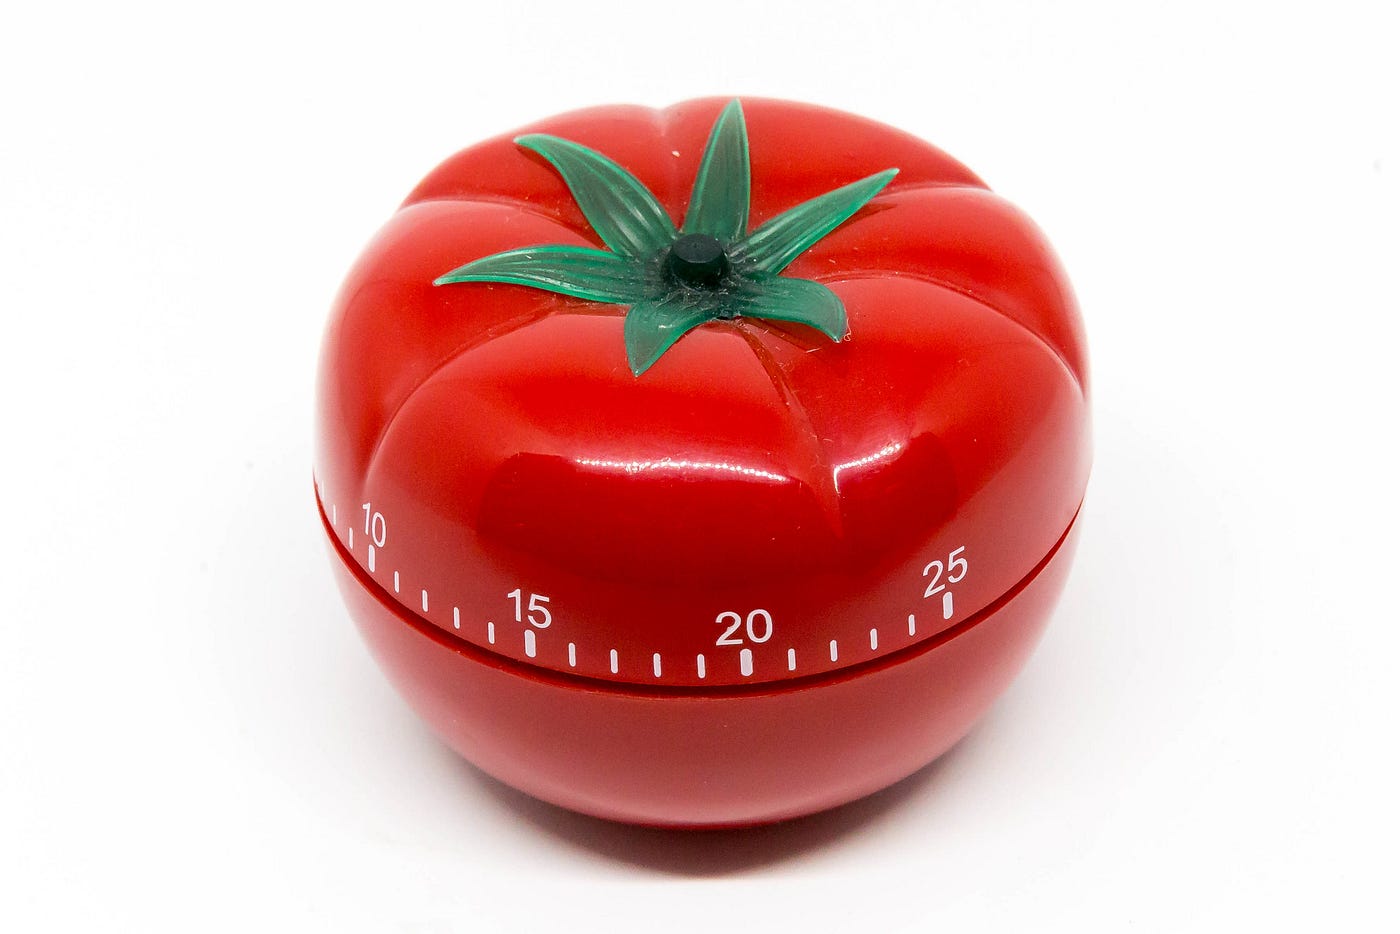 I Created Timer, Just For You 🍅 | by Clive Thompson | Medium